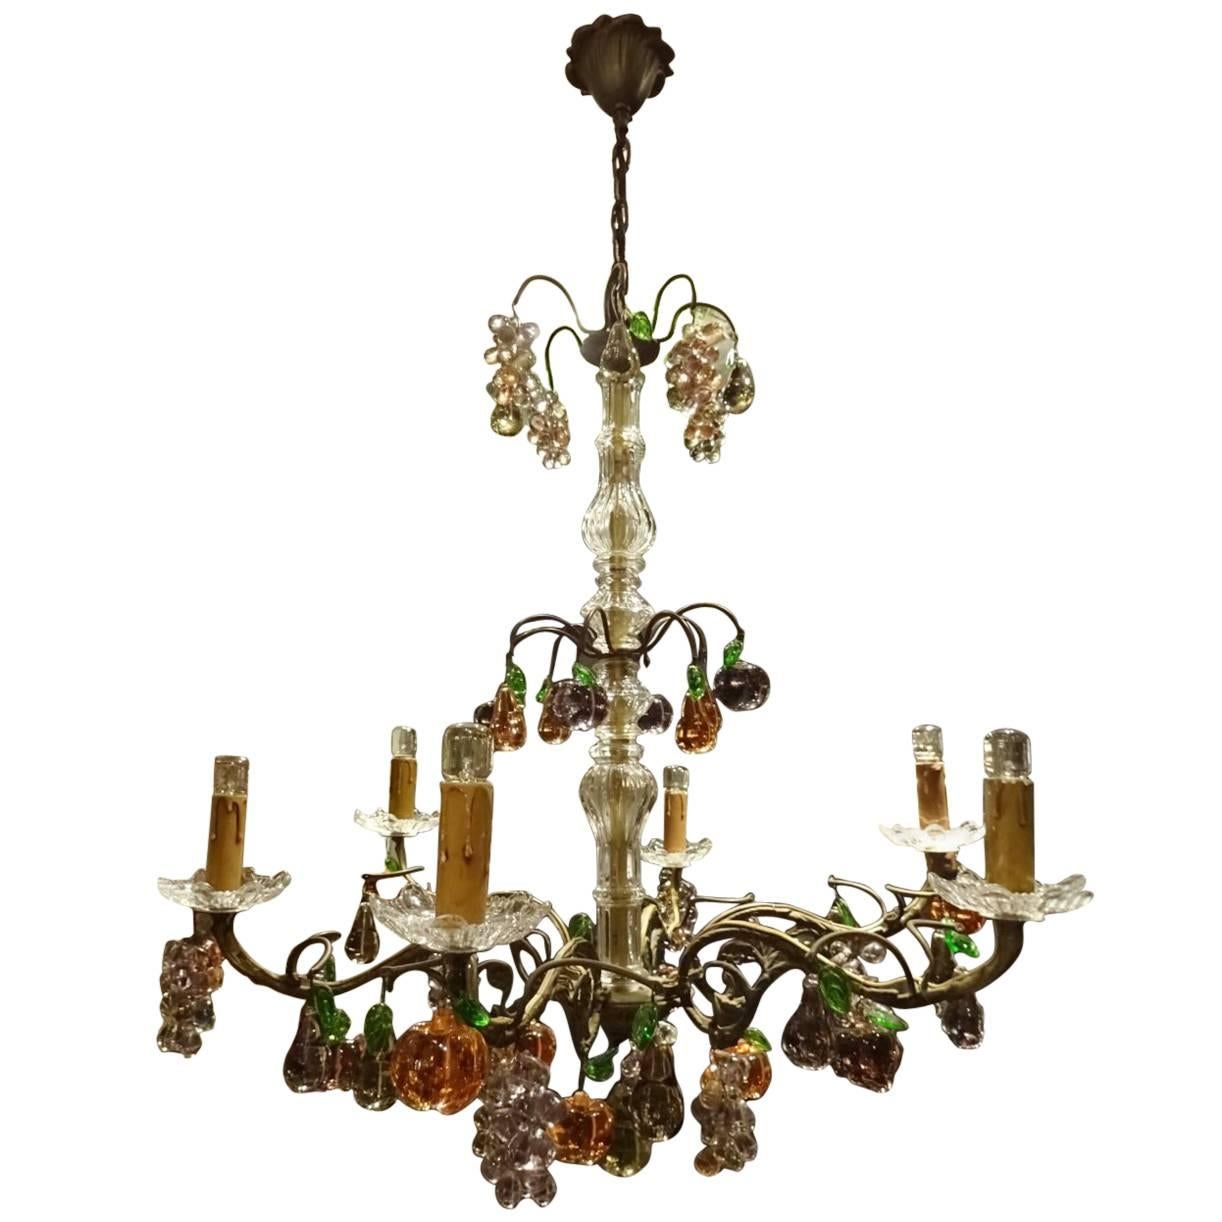 Stunning Cast Iron with Glass Fruit Prisms Vintage Chandelier